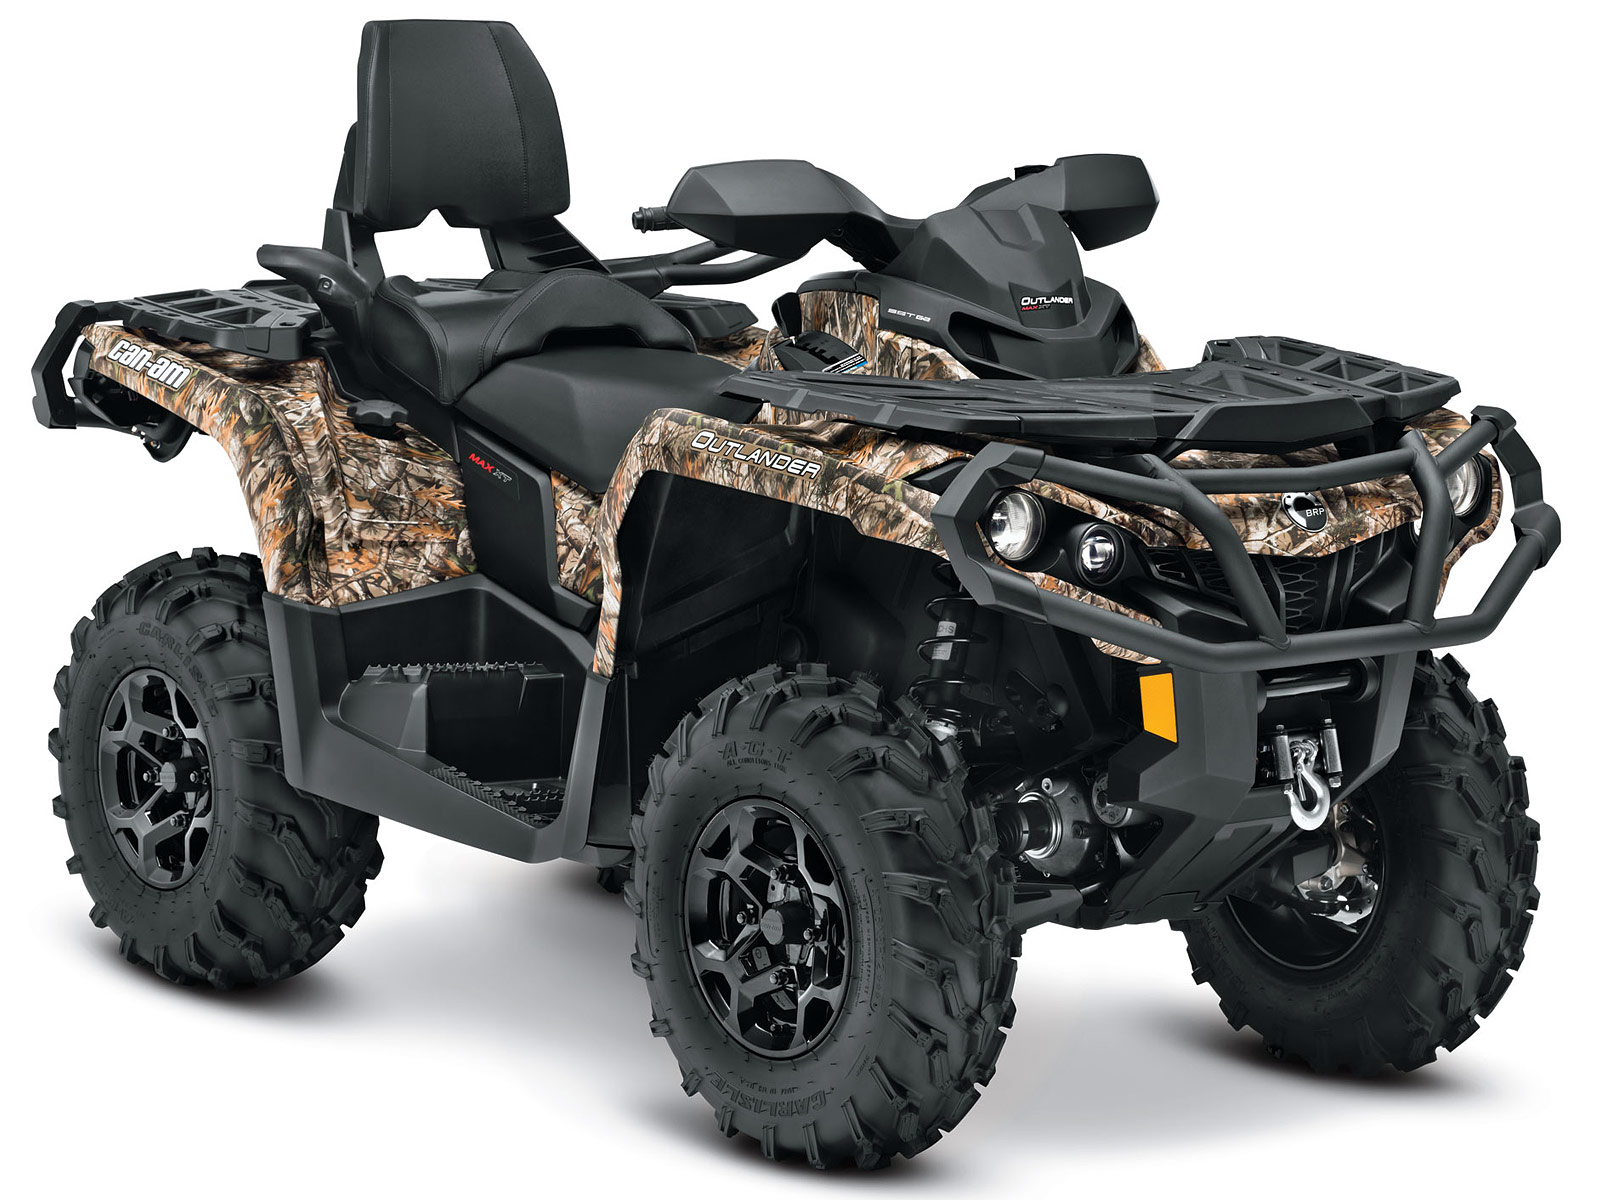 2012 Can-Am Outlander MAX-800R-XT ATV pictures